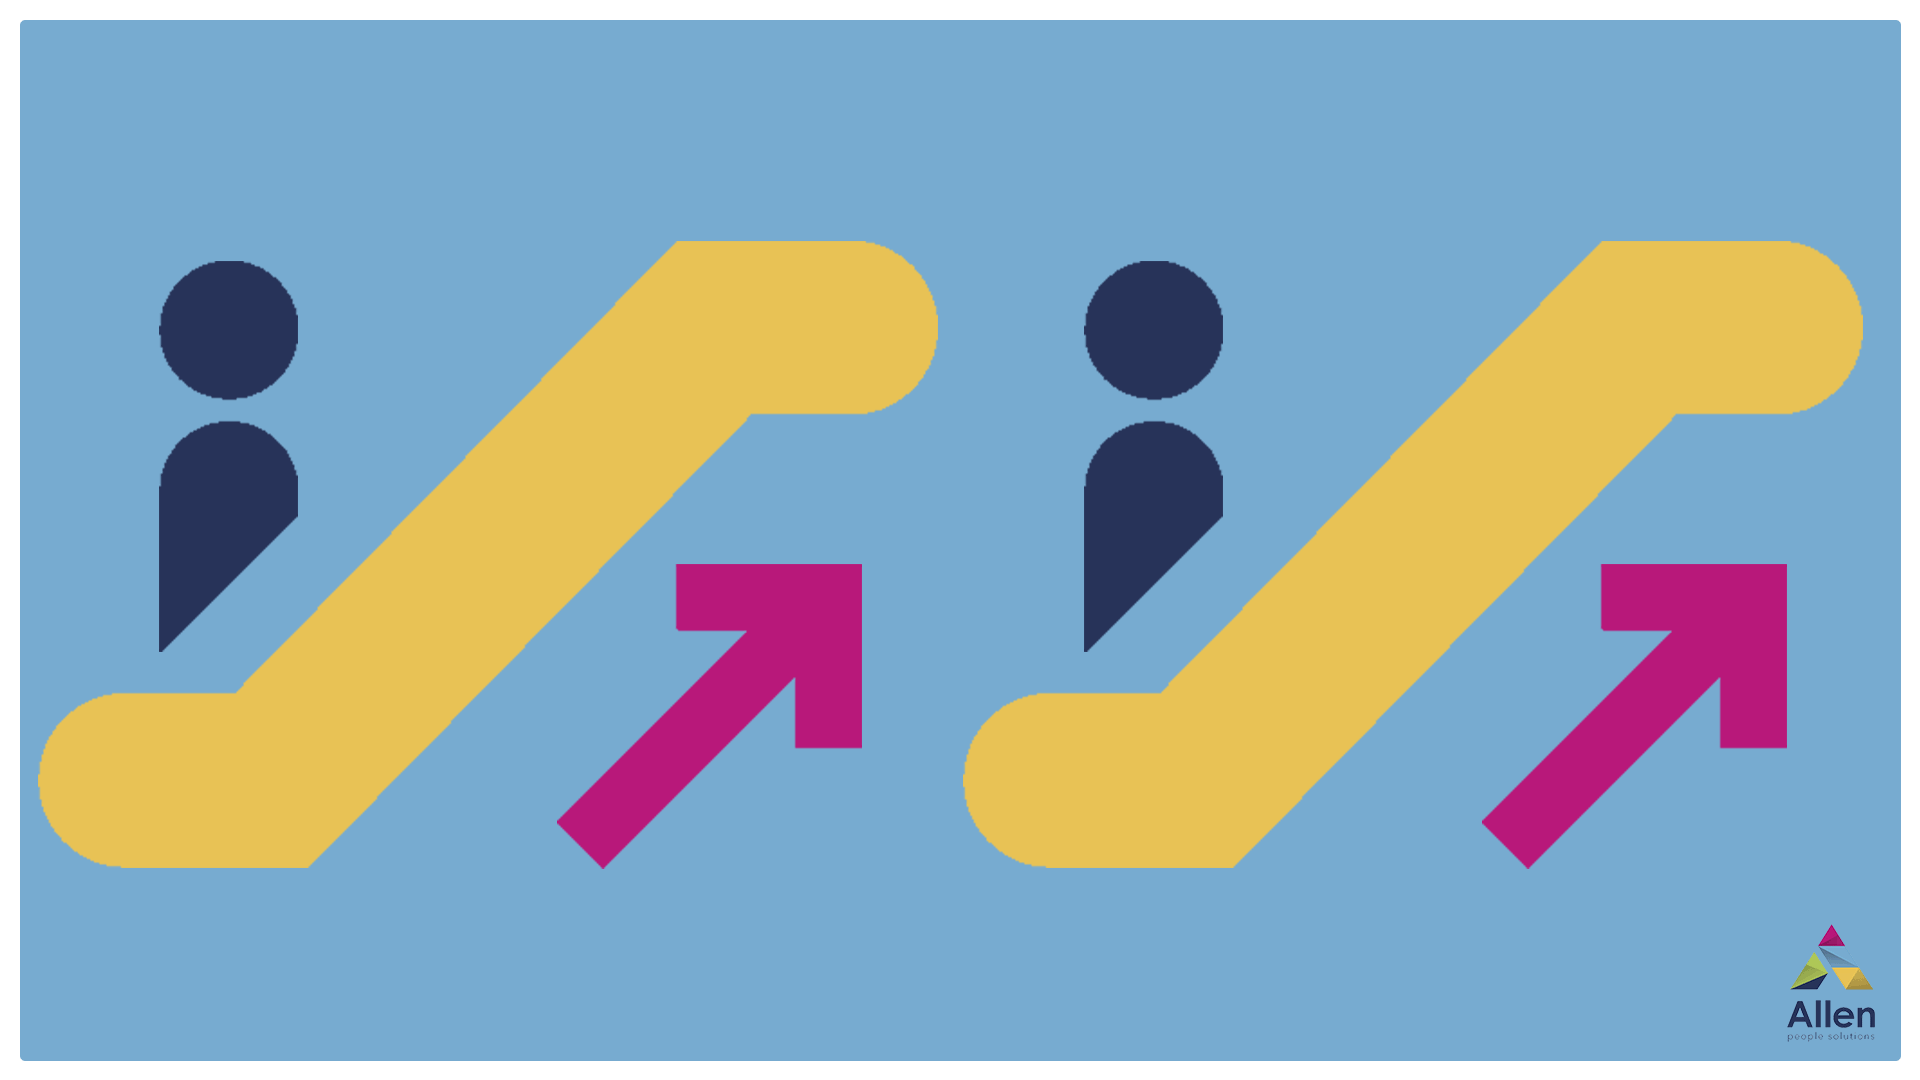 Gif of person icon going up an escalator to represent onboarding managers in your organisation.